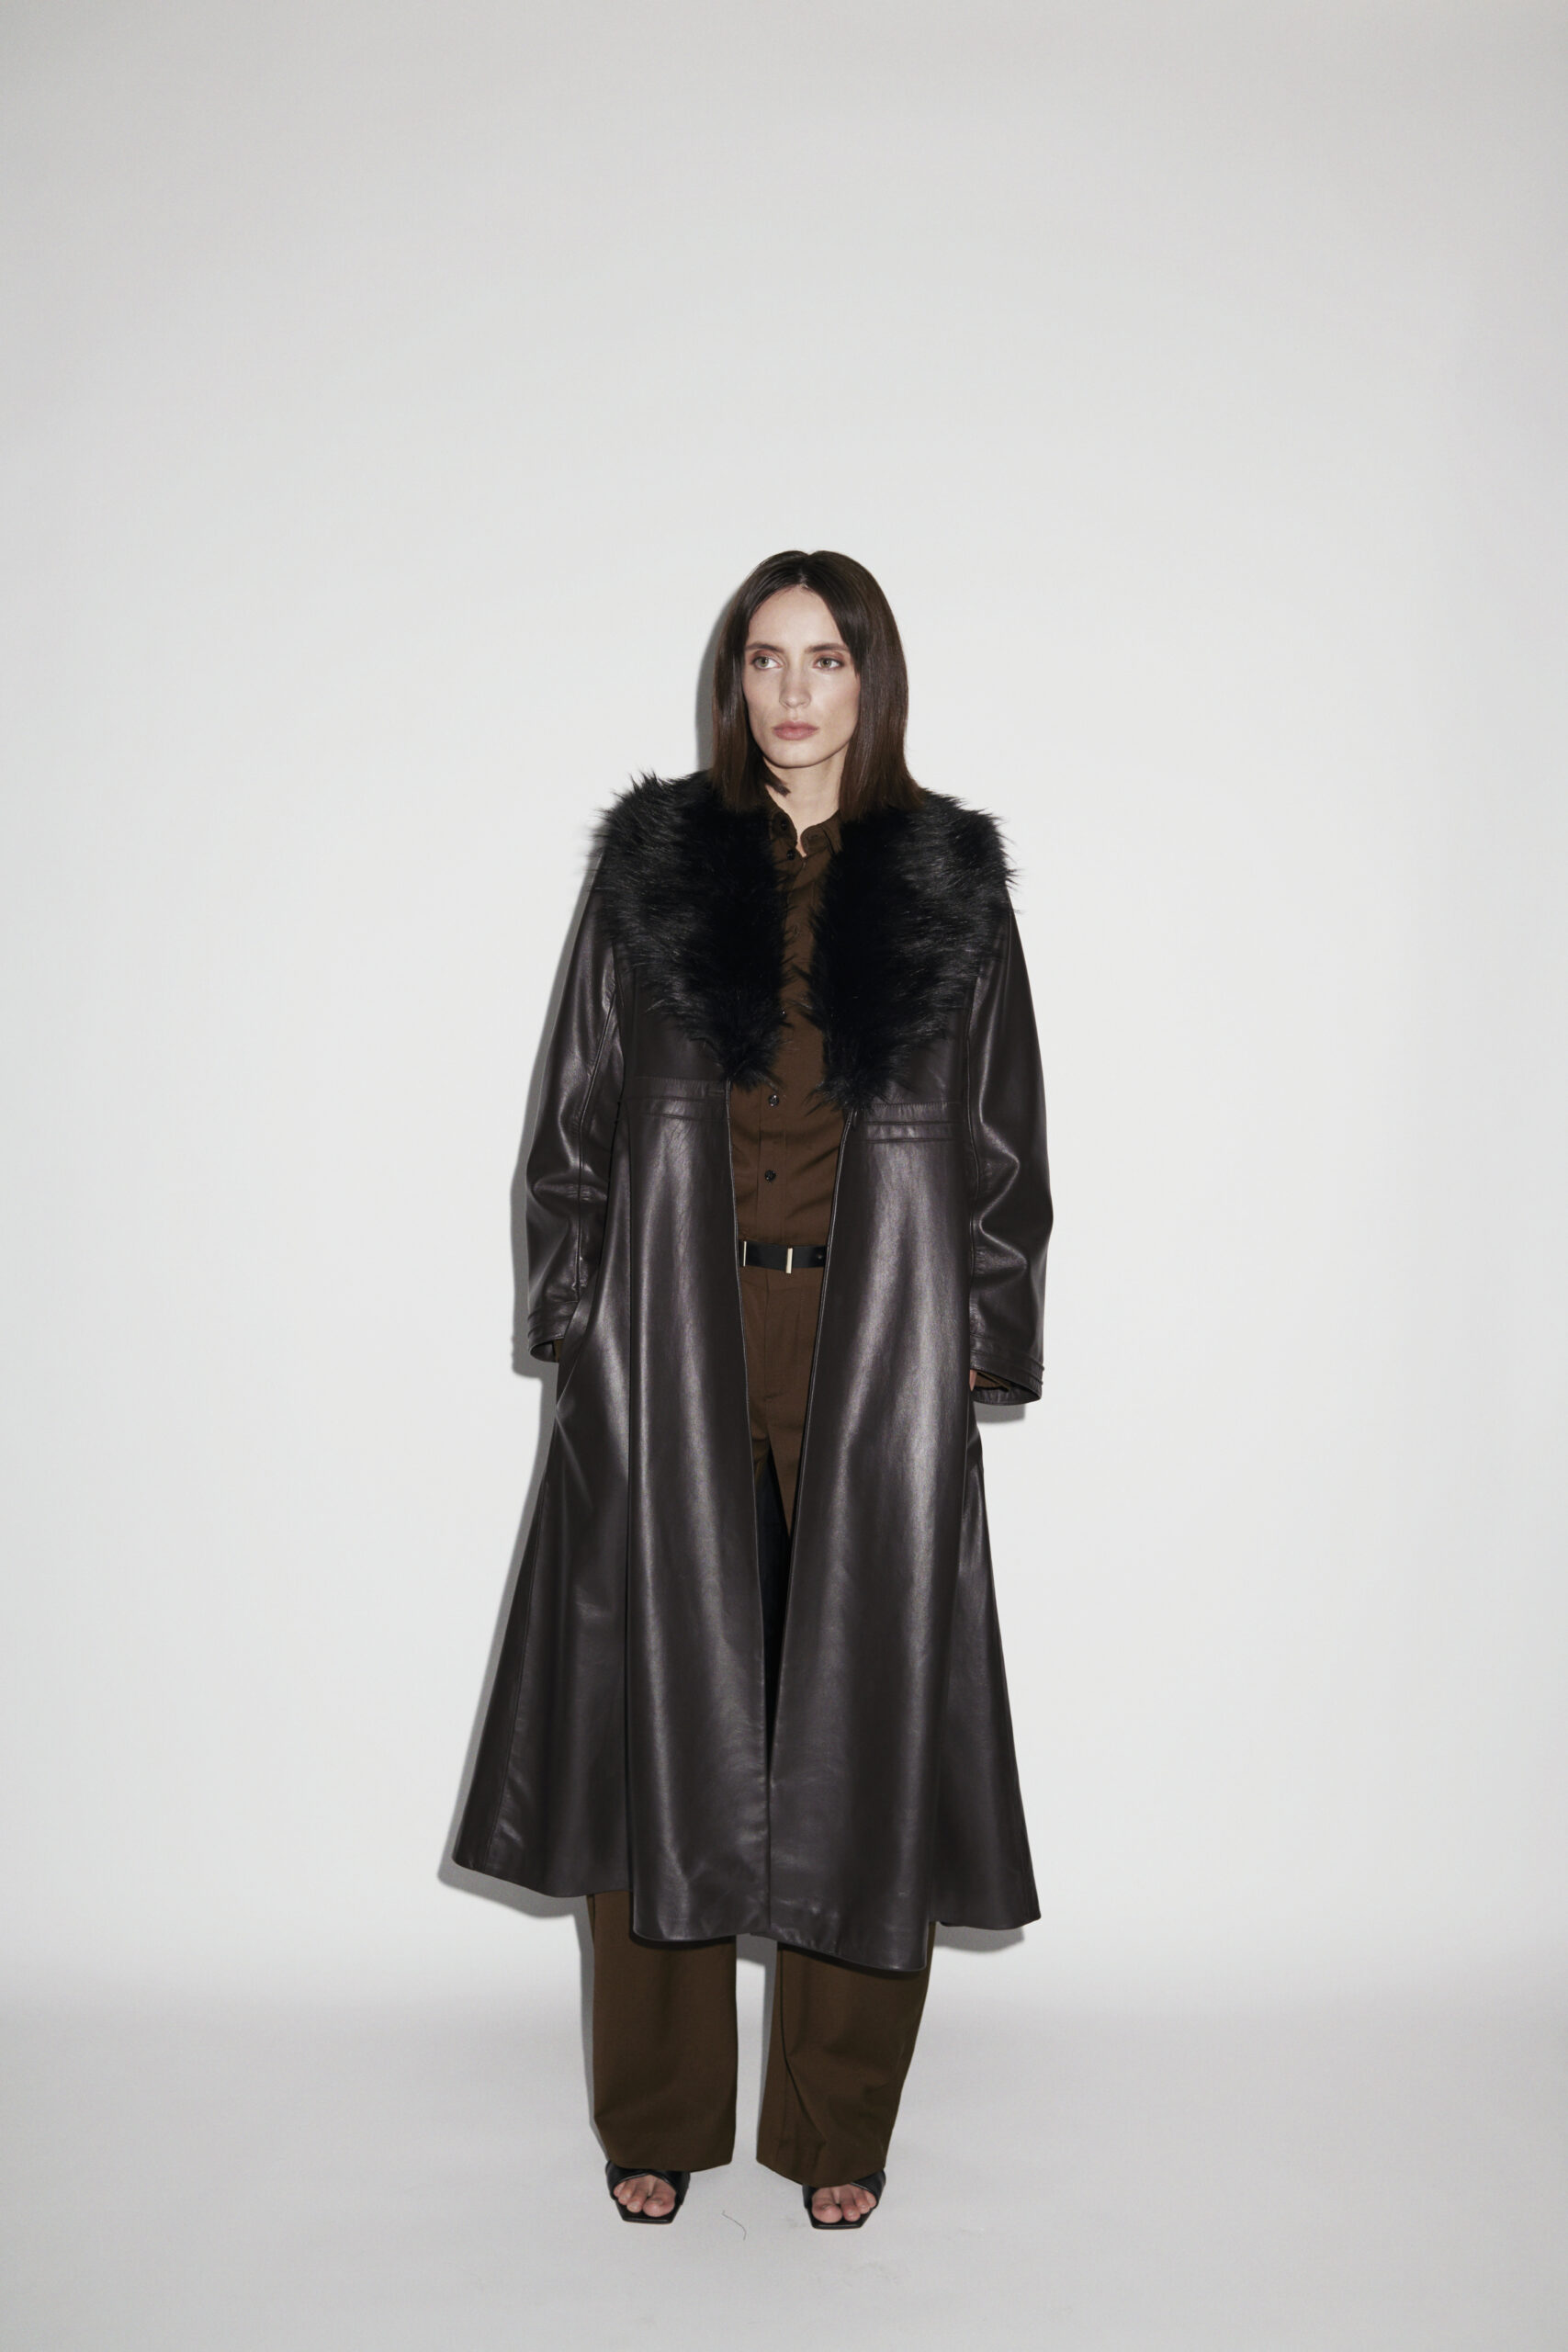 Edward Leather Trench Coat in Dark Chocolate